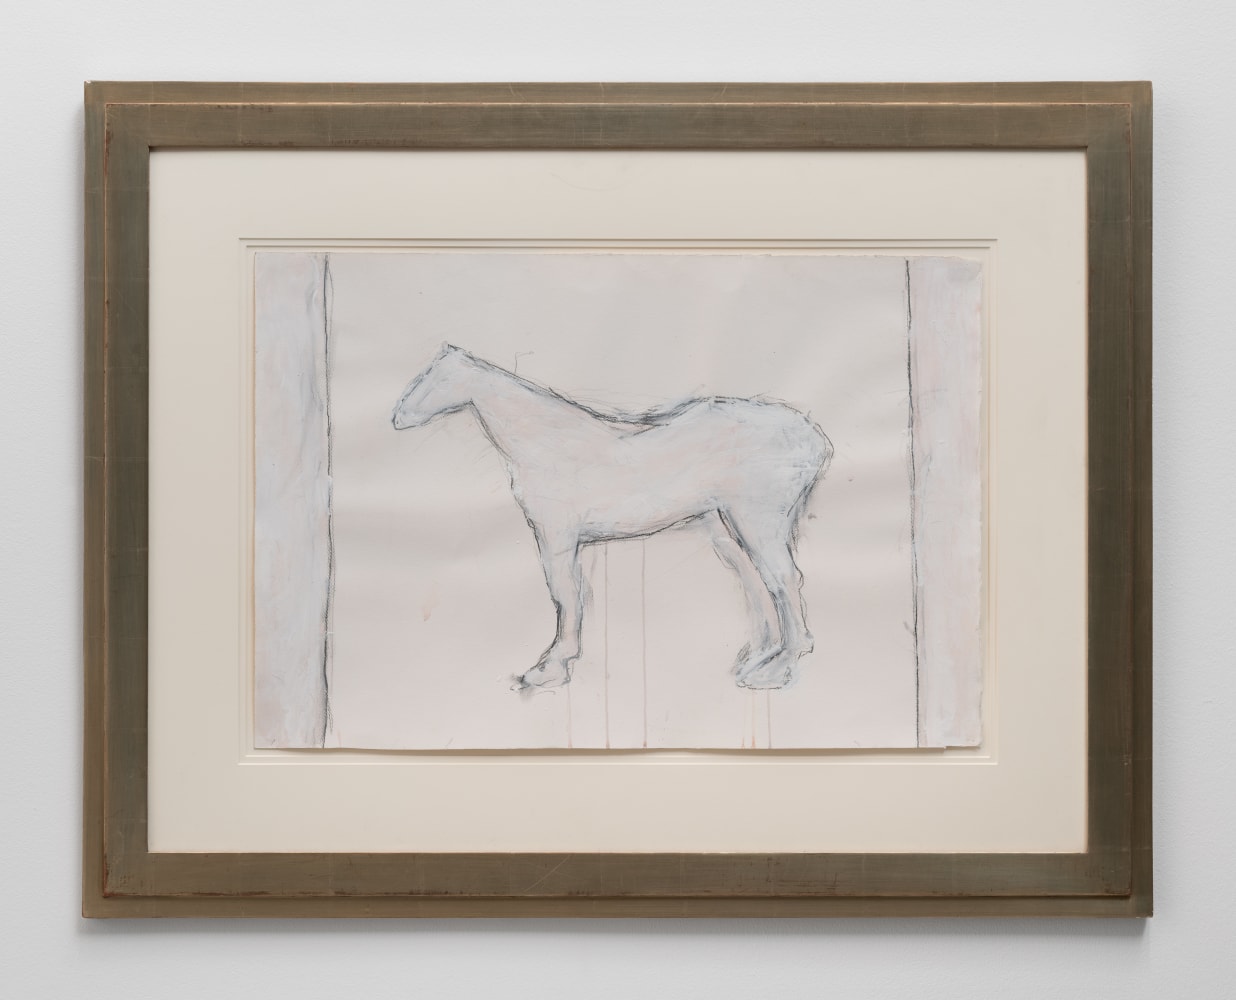 Susan Rothenberg
Untitled,&amp;nbsp;1976
Acrylic and graphite on paper
18 &amp;times; 26&amp;nbsp;⅜ in.
(45.7 &amp;times; 67 cm)
Private Collection